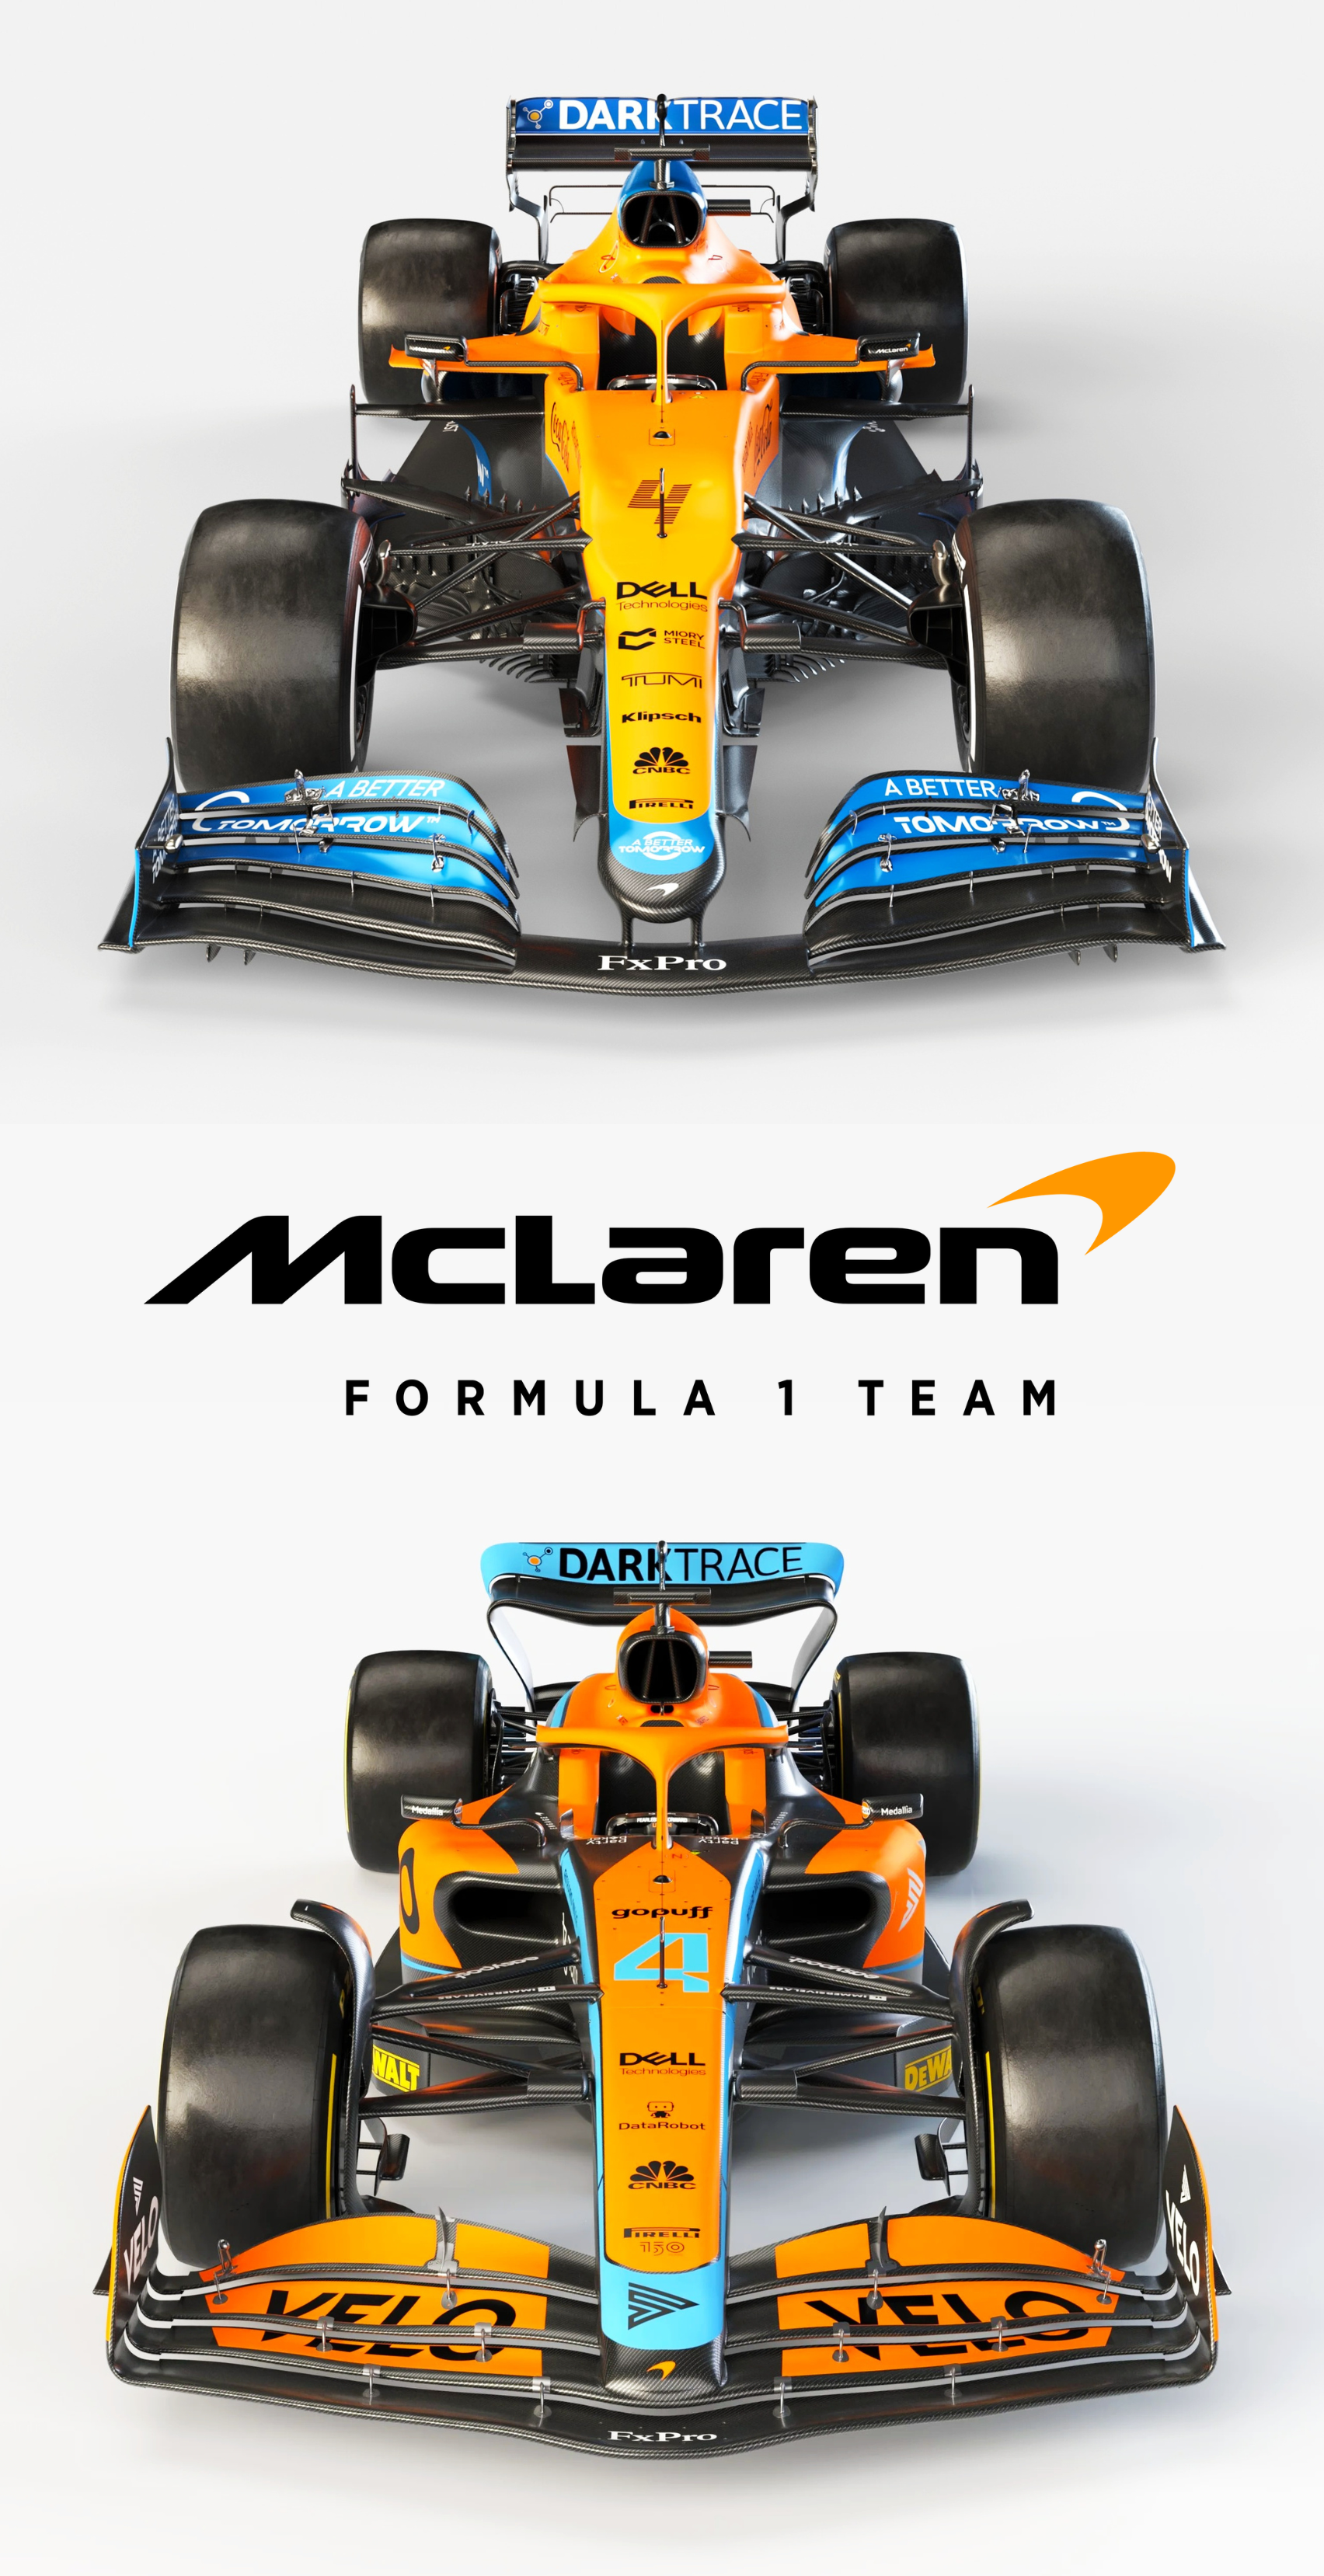 Wallpaper of Mclaren F1 cars from 2017 to 2022 (fixed)